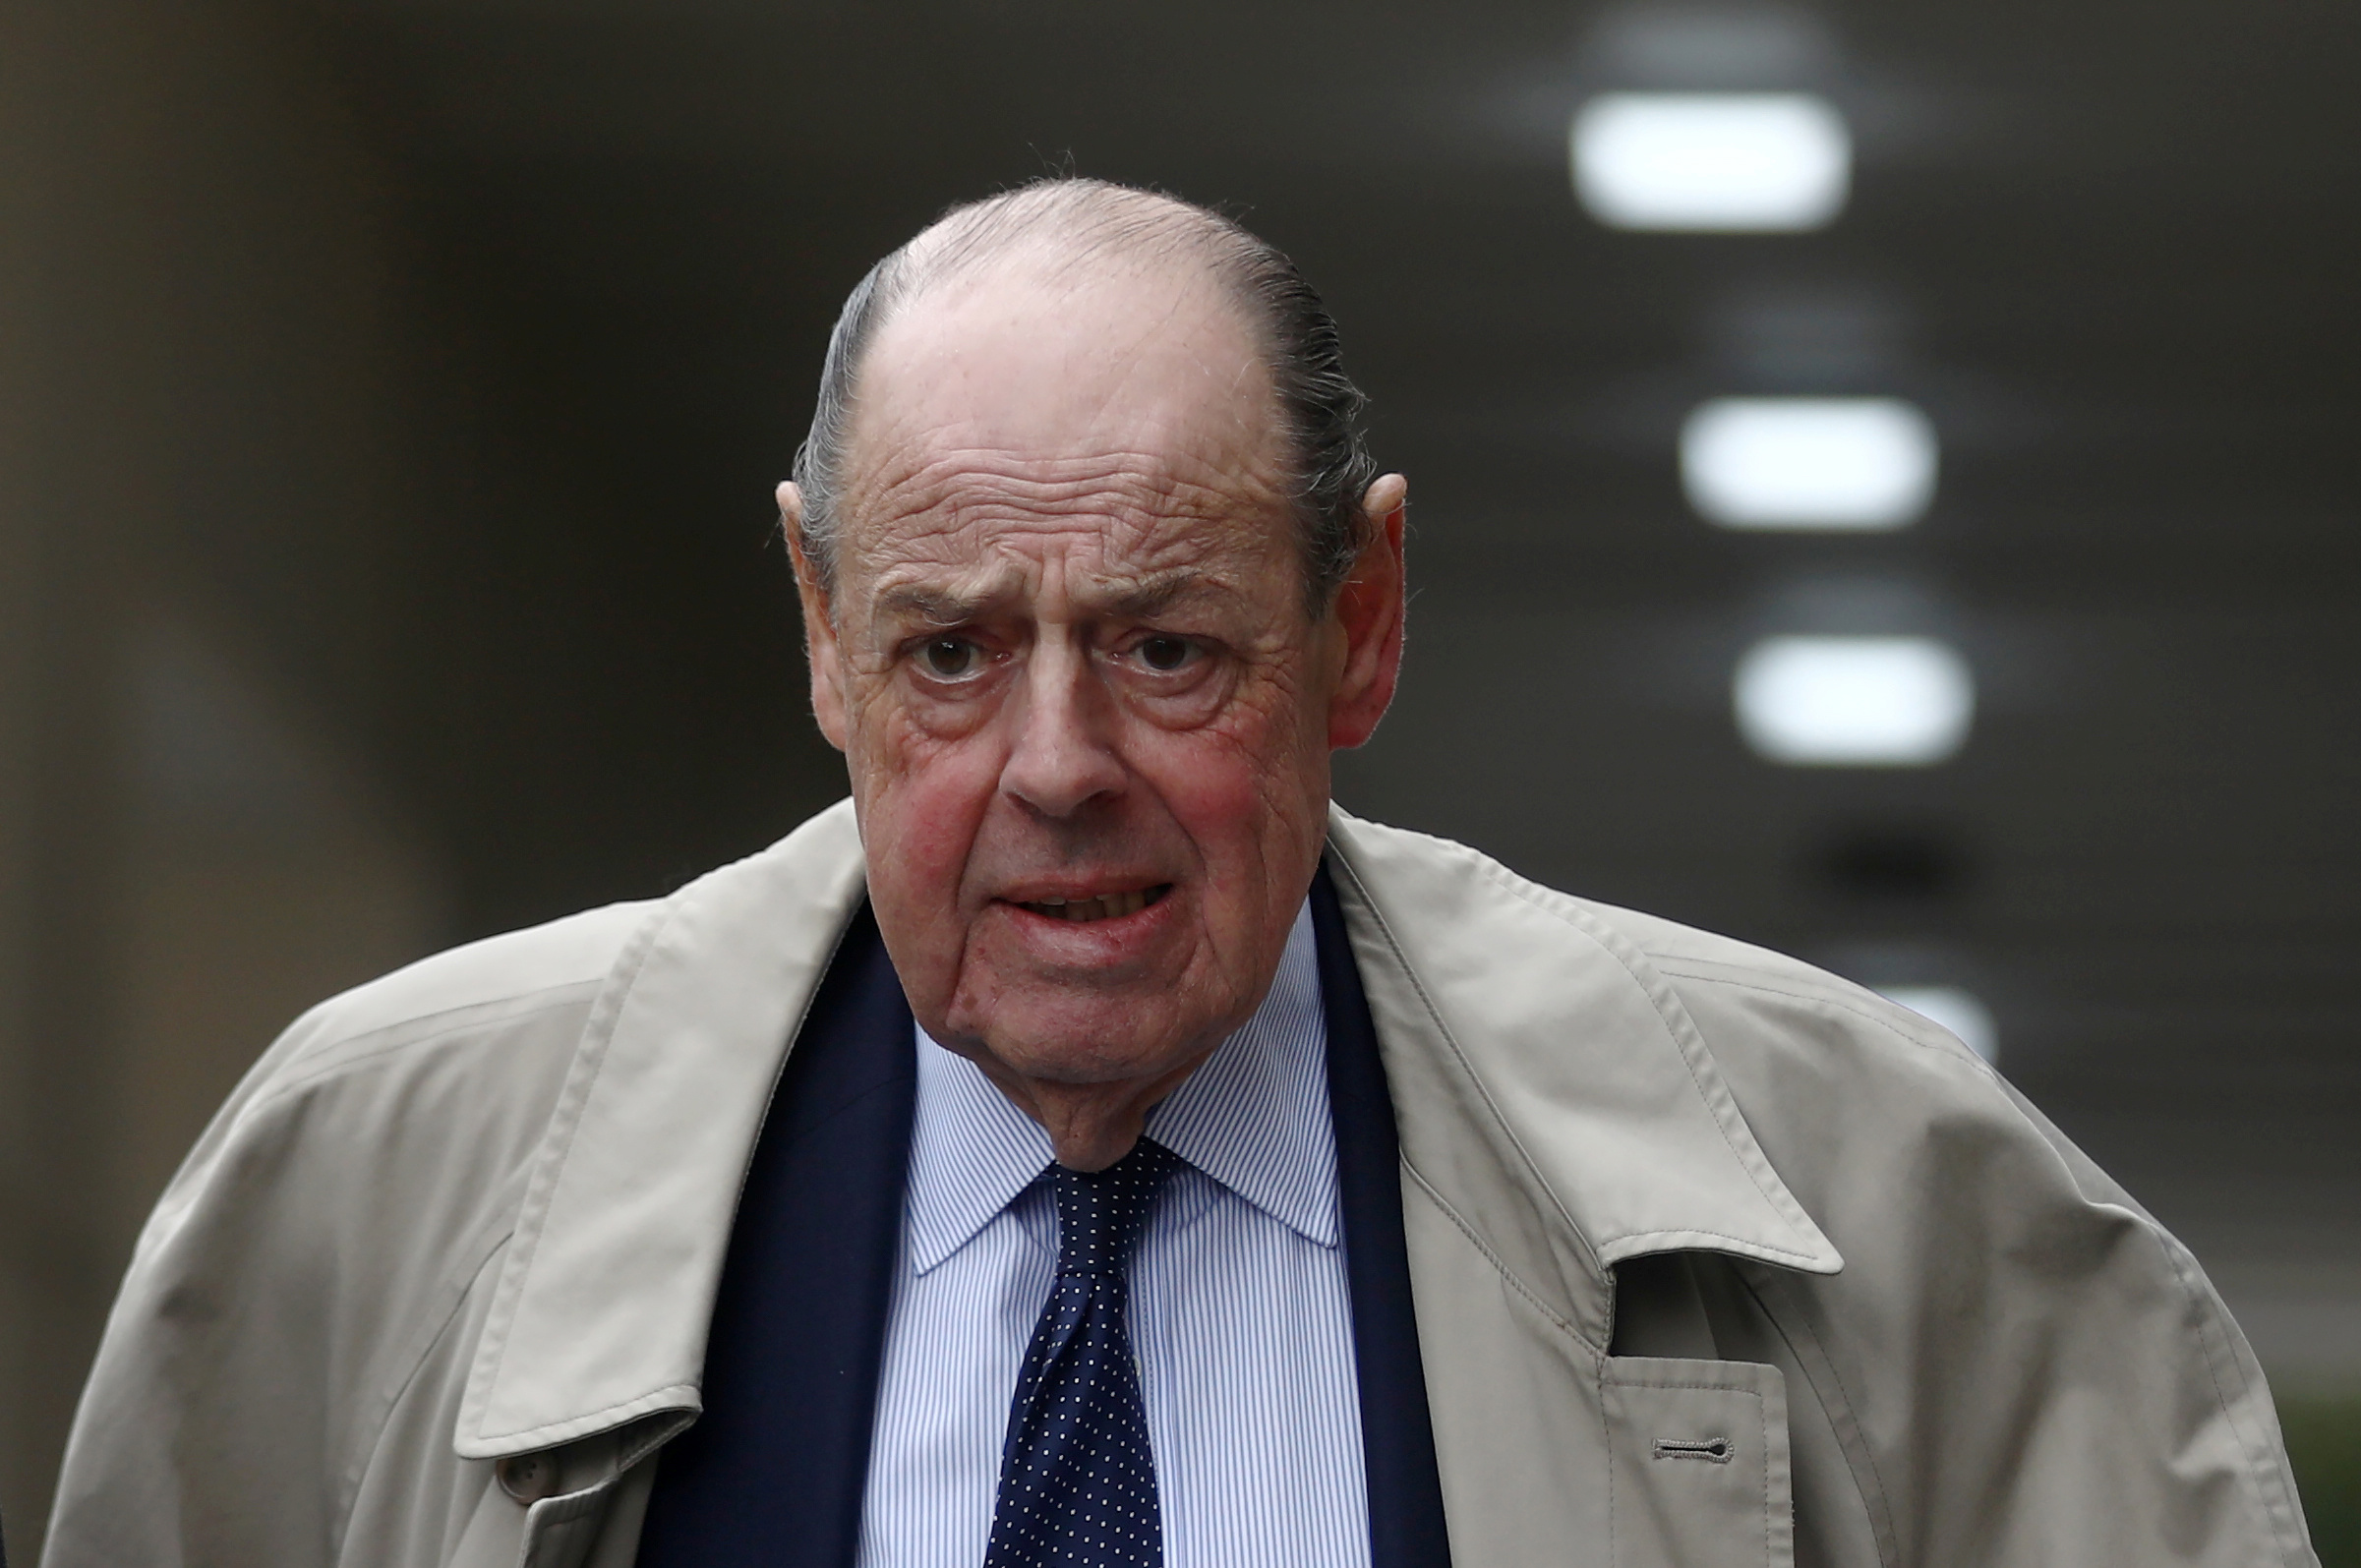 PHOTO: Conservative Member of Parliament Nicholas Soames walks in Westminster, in London, Sept 3, 2019.